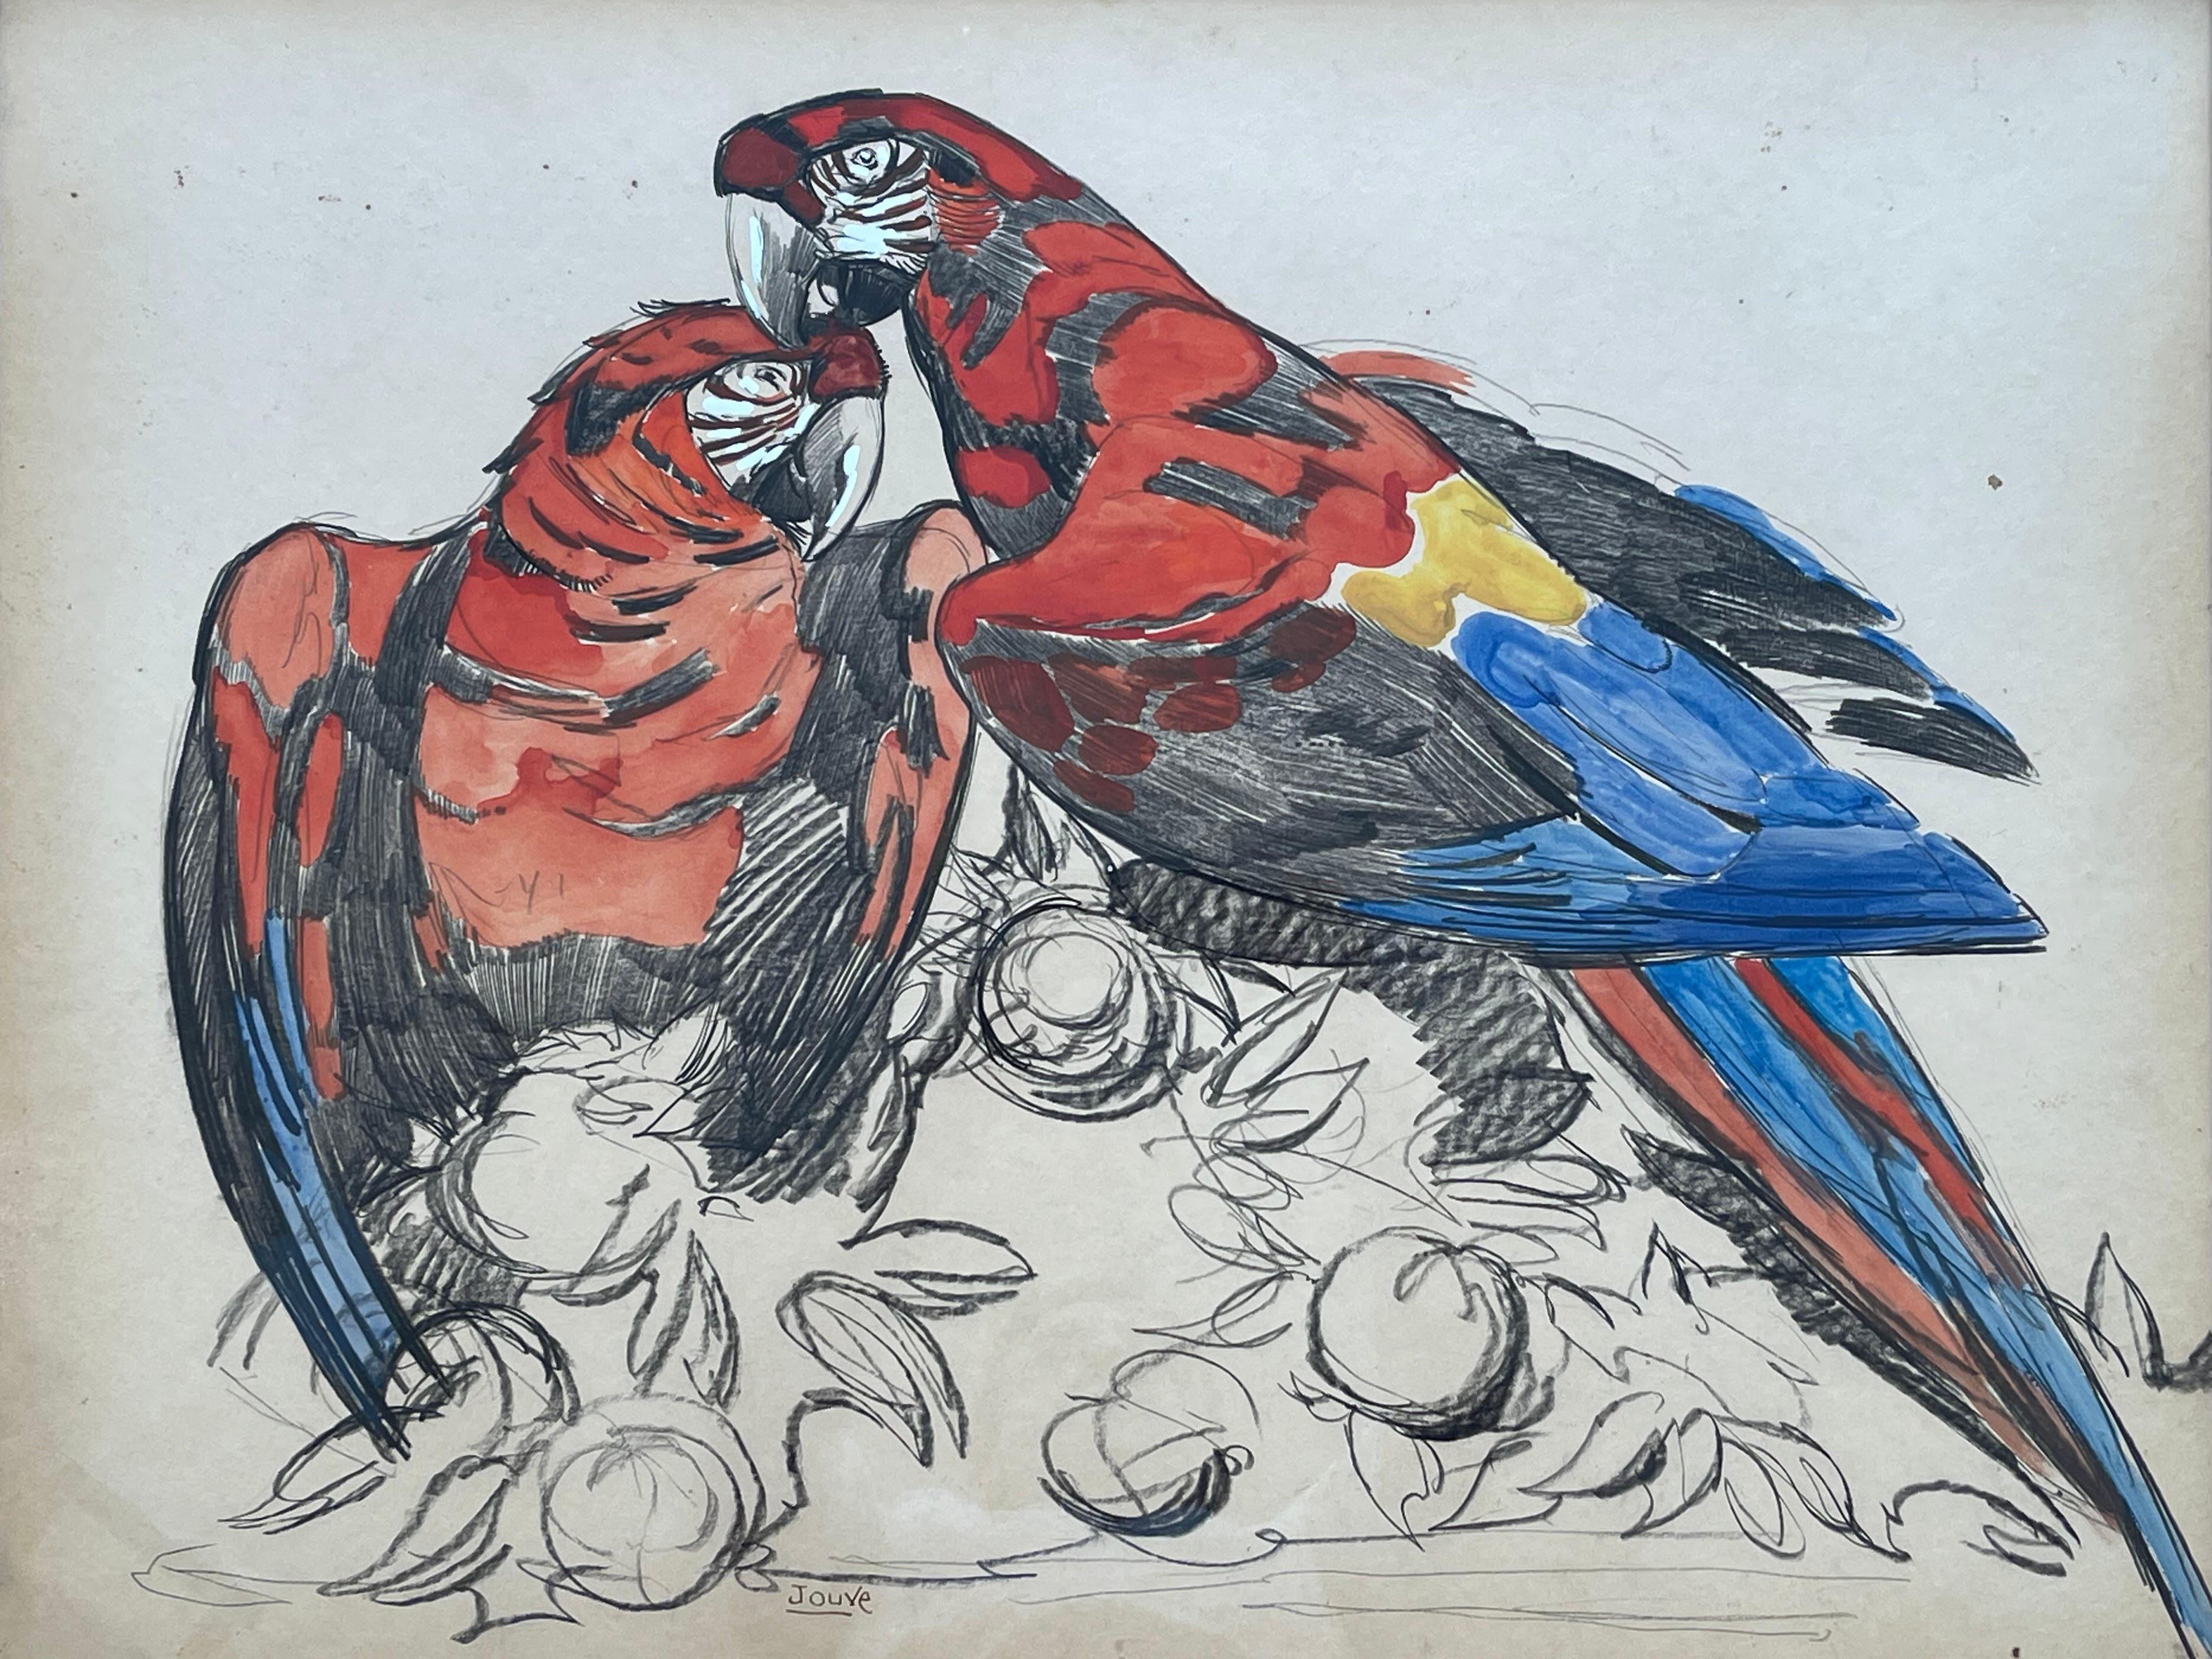 This stunning painting was created by the French artist Paul Jouve (1866-1924) in the 1930's and depicts two parrots.

Paul Jouve was an illustrator and sculptor who had a lifelong passion for animals, as evidenced by his fabulous portrayal of these